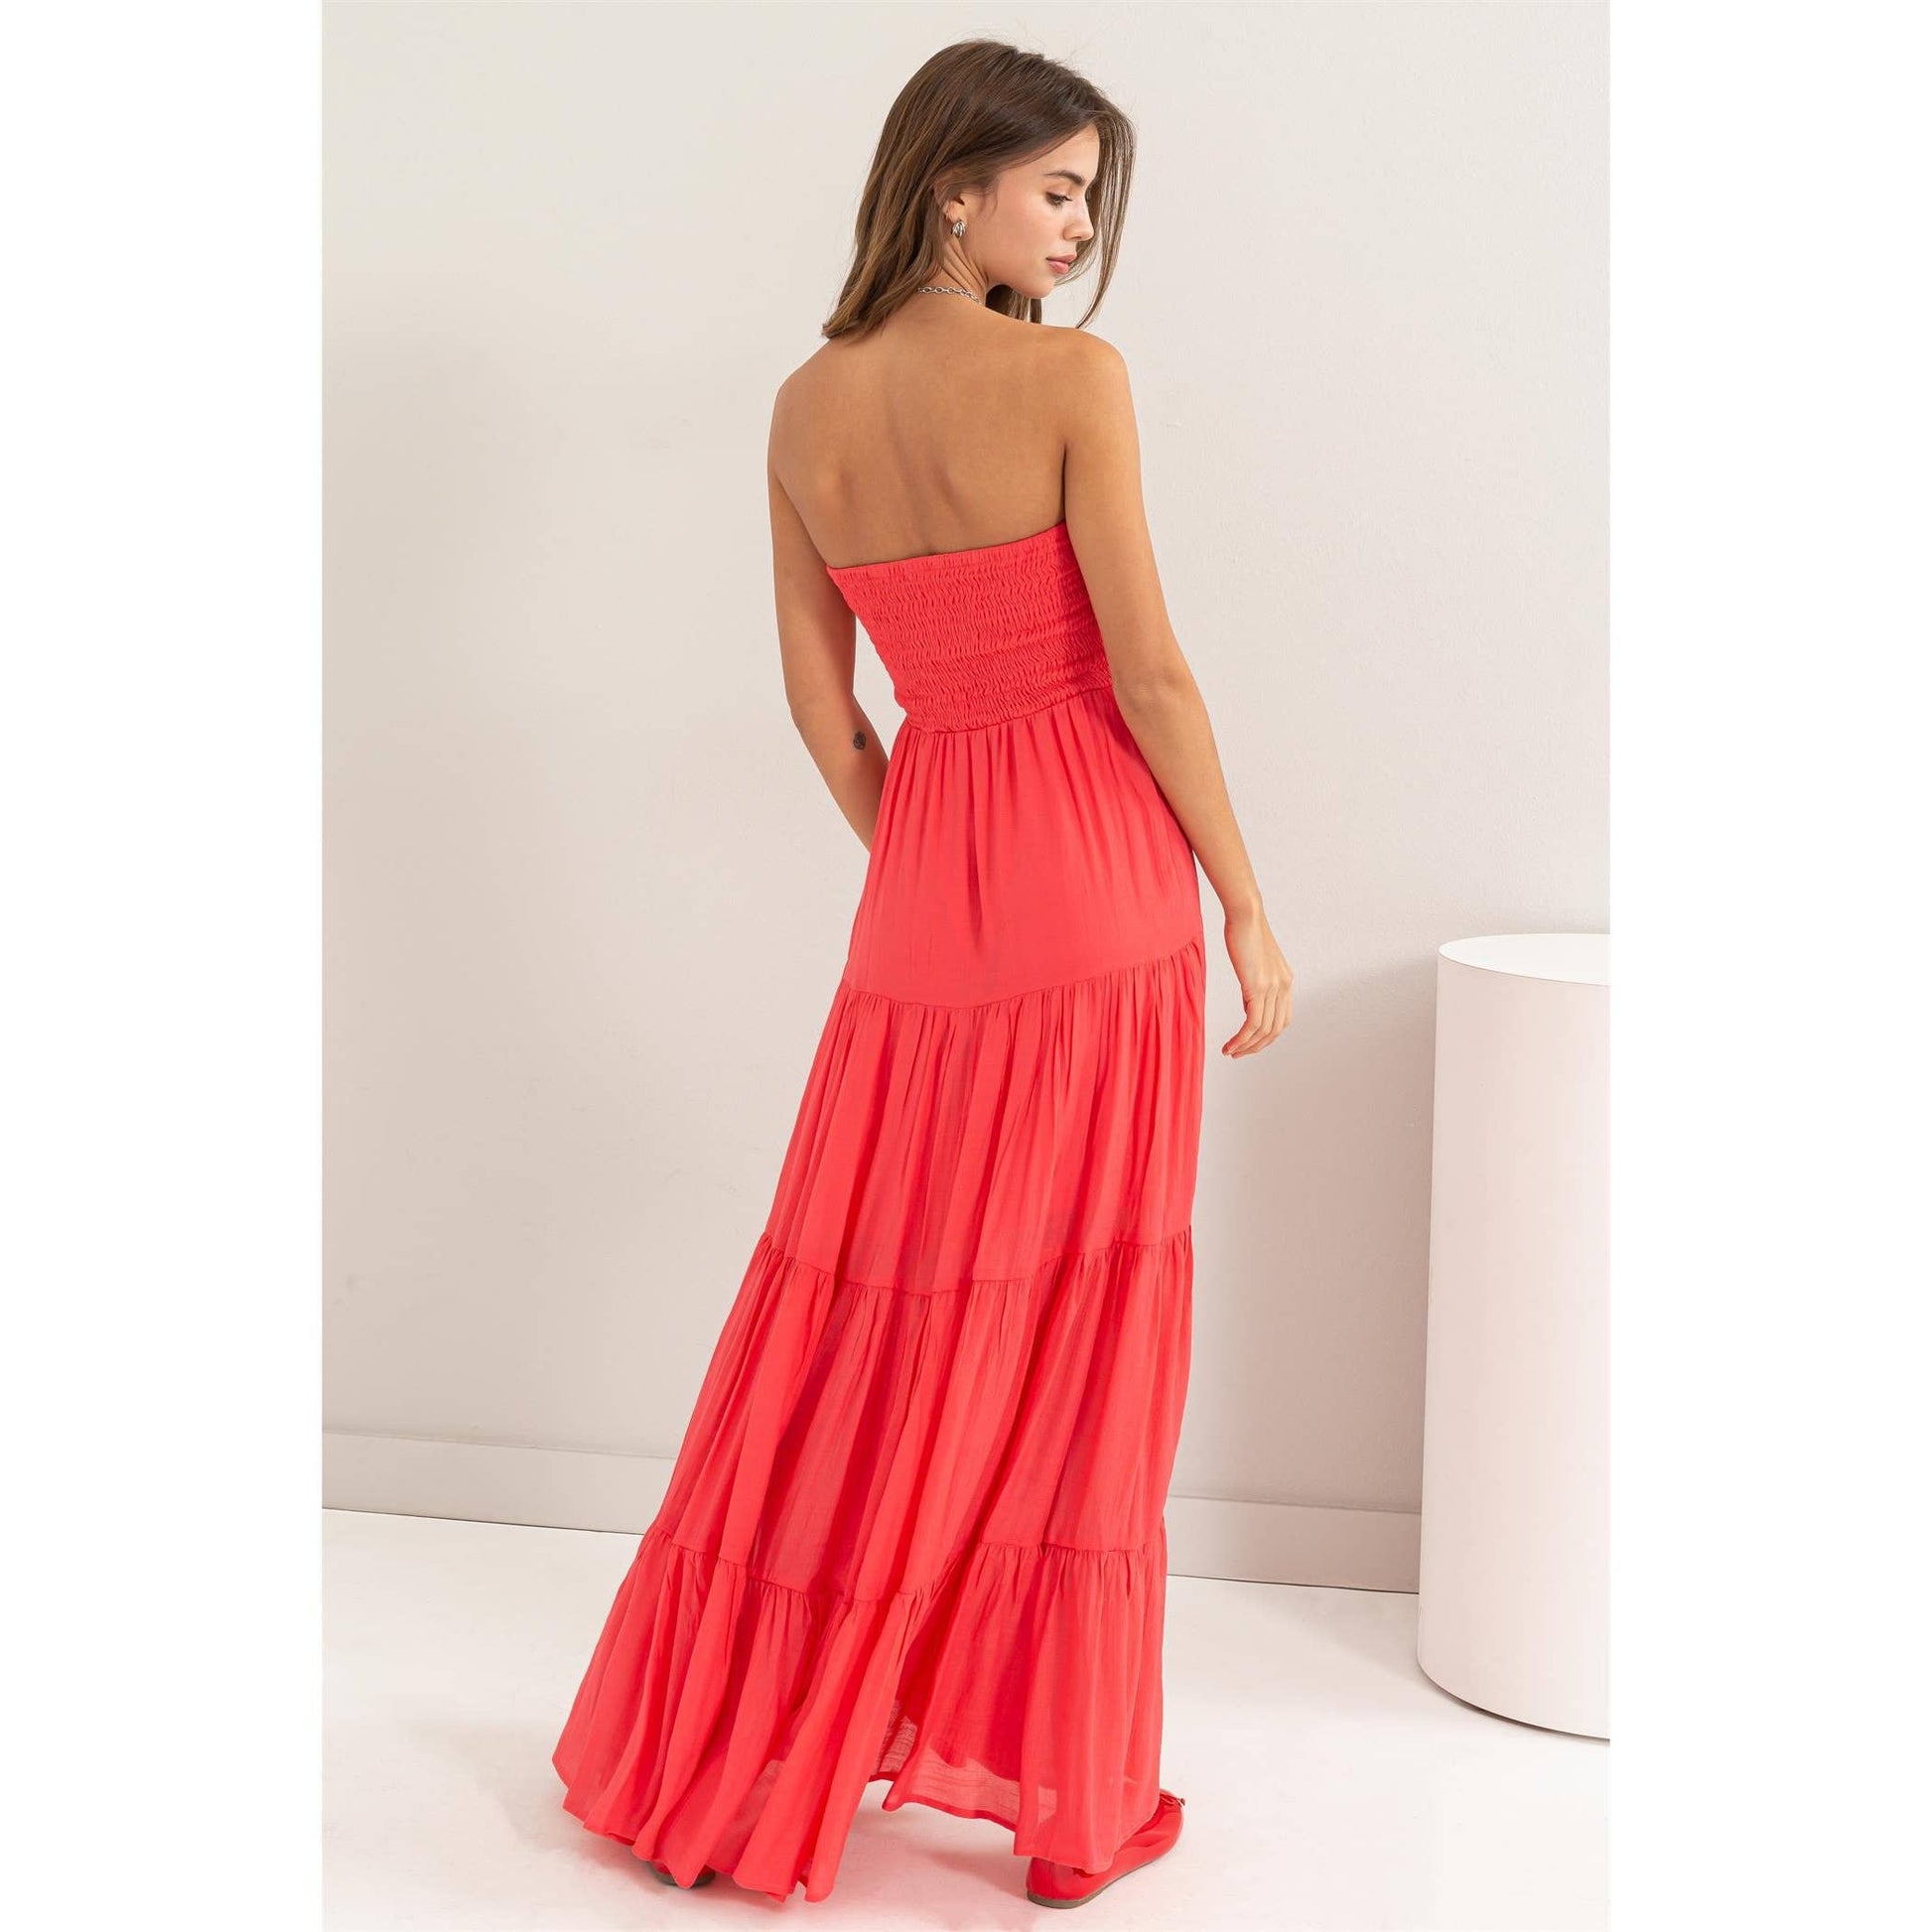 Smocked Strapless Tube Top Tiered Flowy Coral Maxi Dress